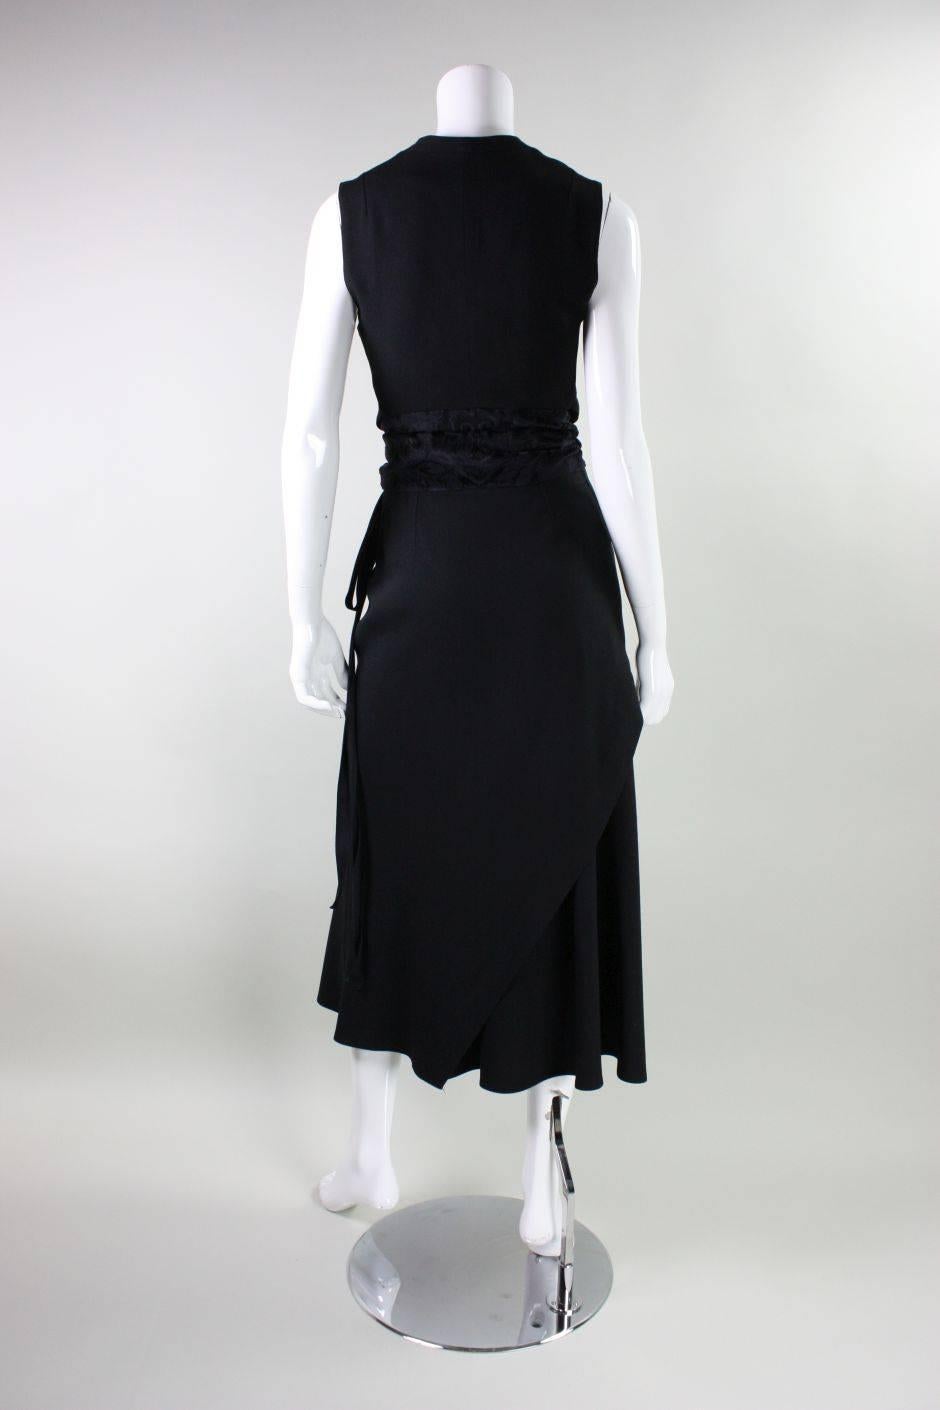 Ann Demeulemeester Vest & Skirt Ensemble In Excellent Condition For Sale In Los Angeles, CA